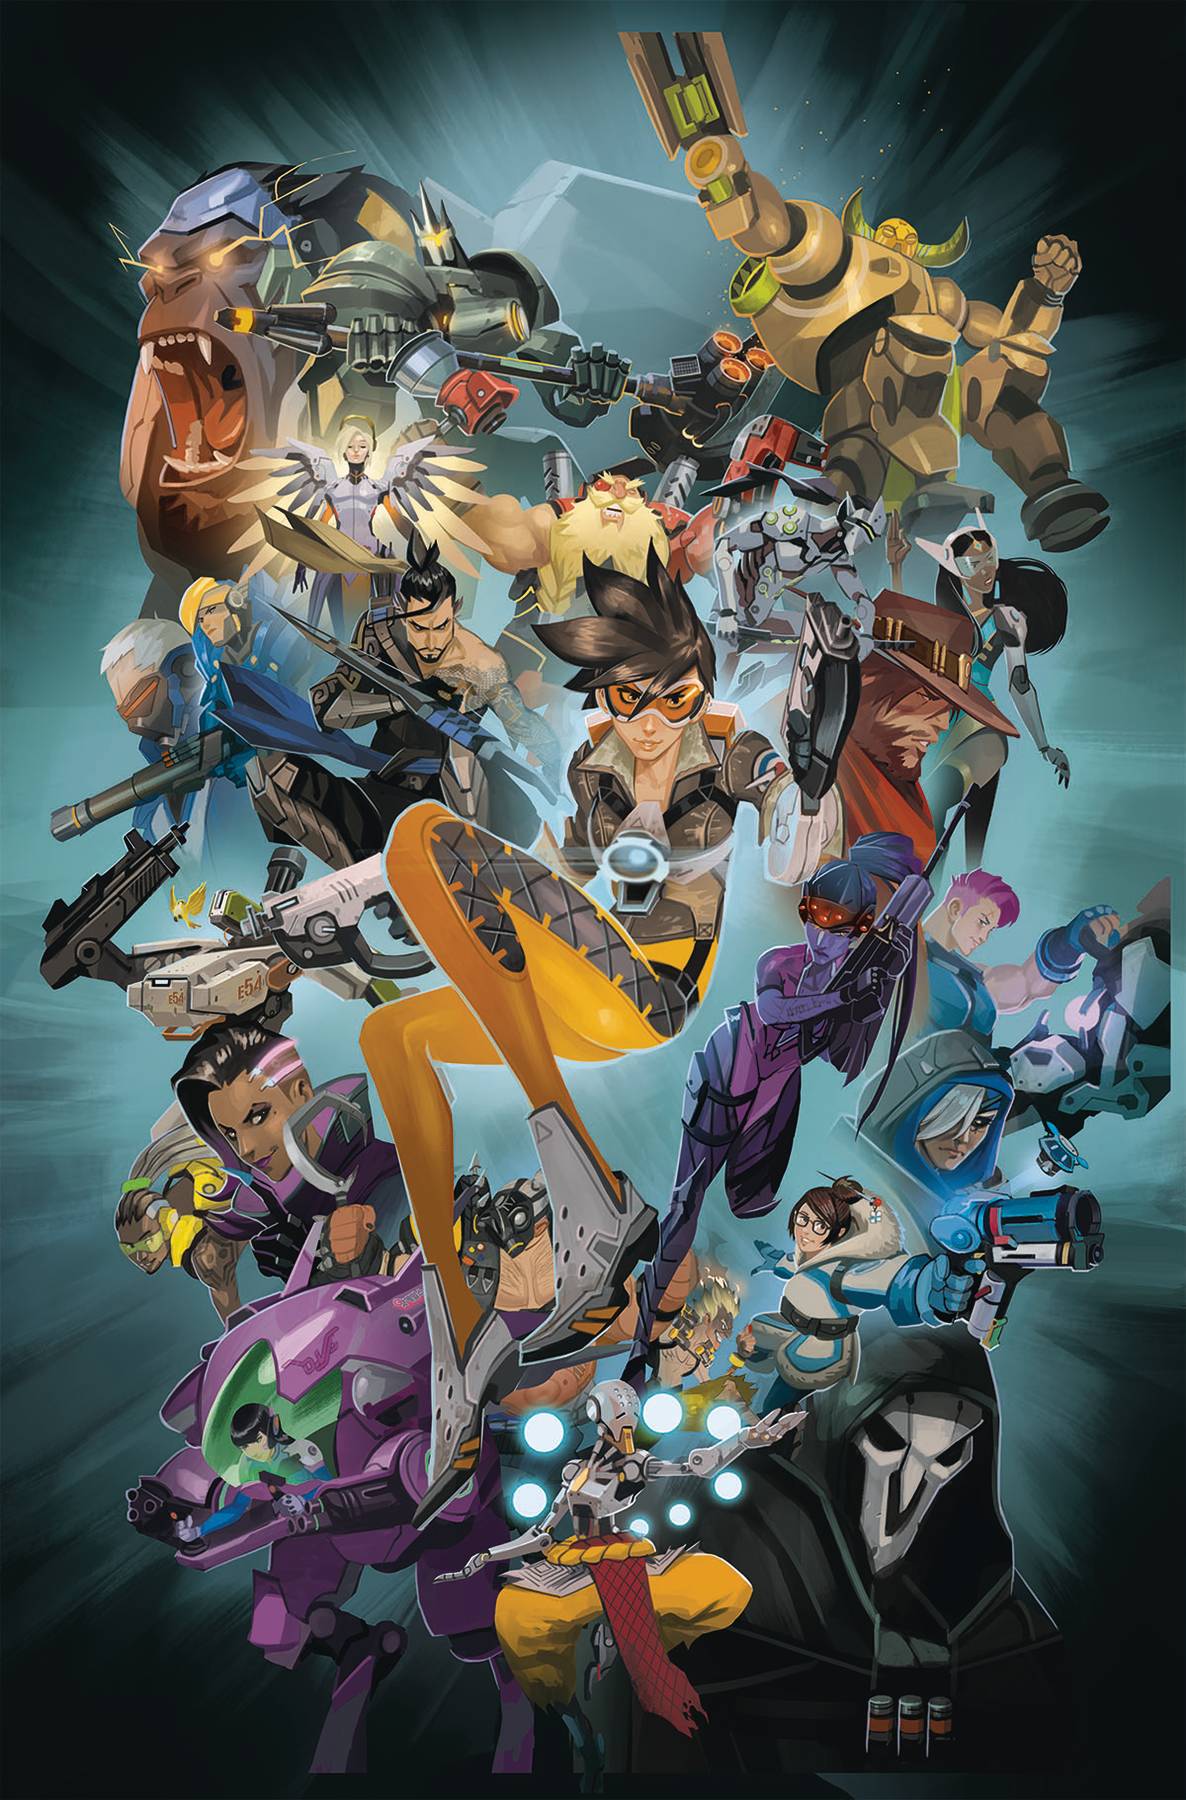 Tracer, a woman with dark spiky hair and wearing an orange jumpsuit and goggles, holds a sci-fi-looking gun as she looks forward. Behind her, the other Overwatch cast members form a rough visual ring, most with weapons at the ready.